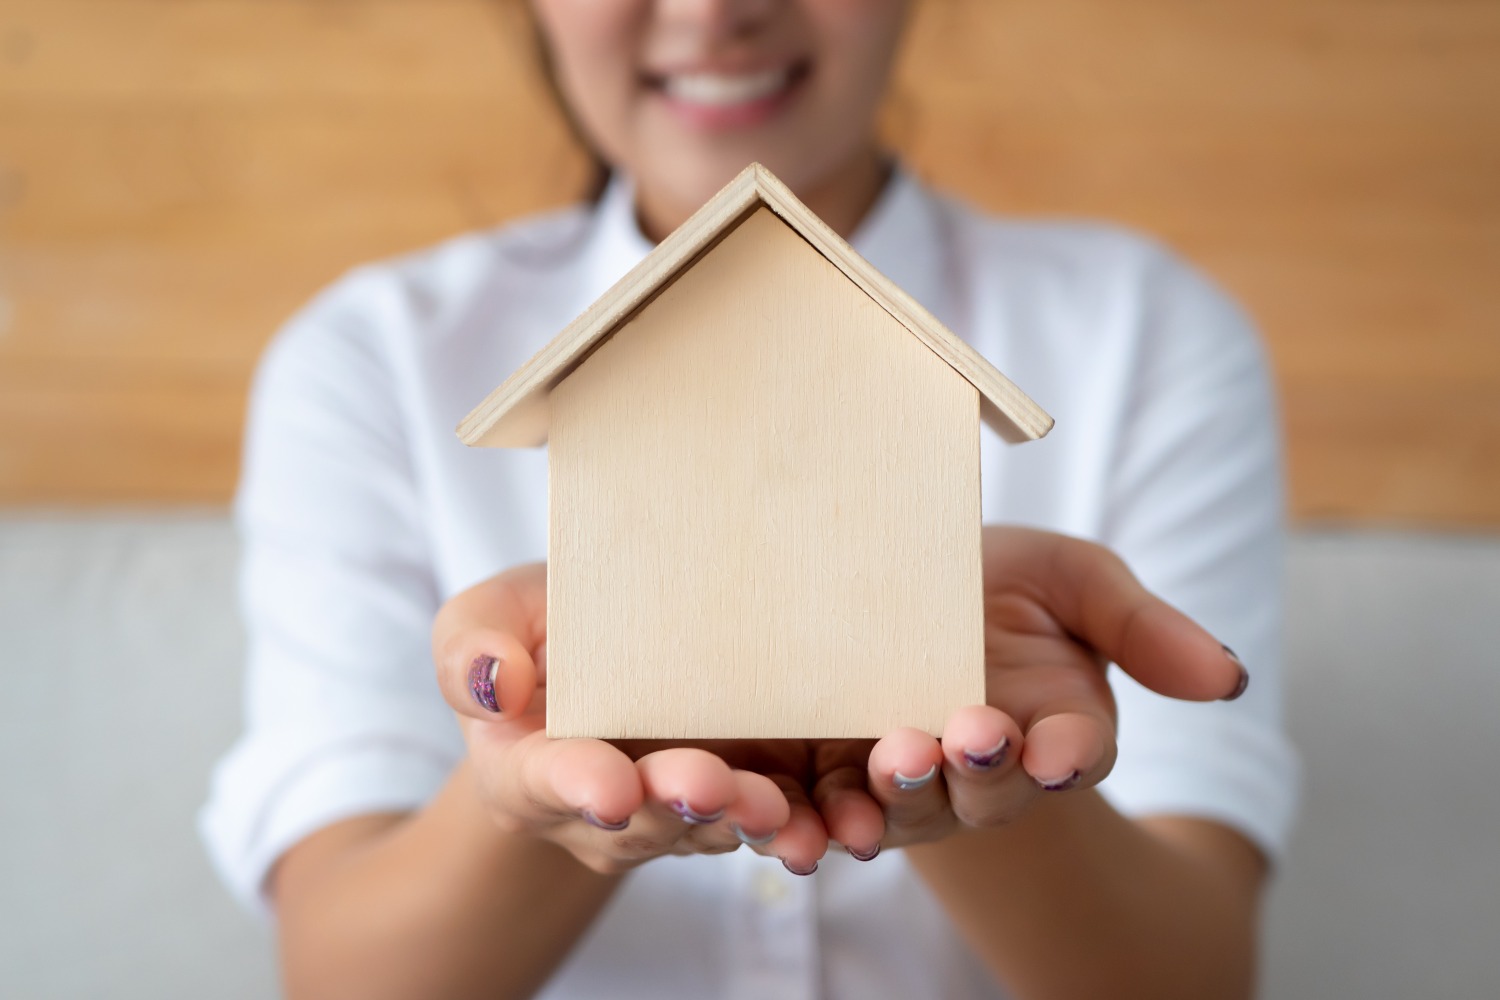 Woman holding small wooden house in hands - home buying